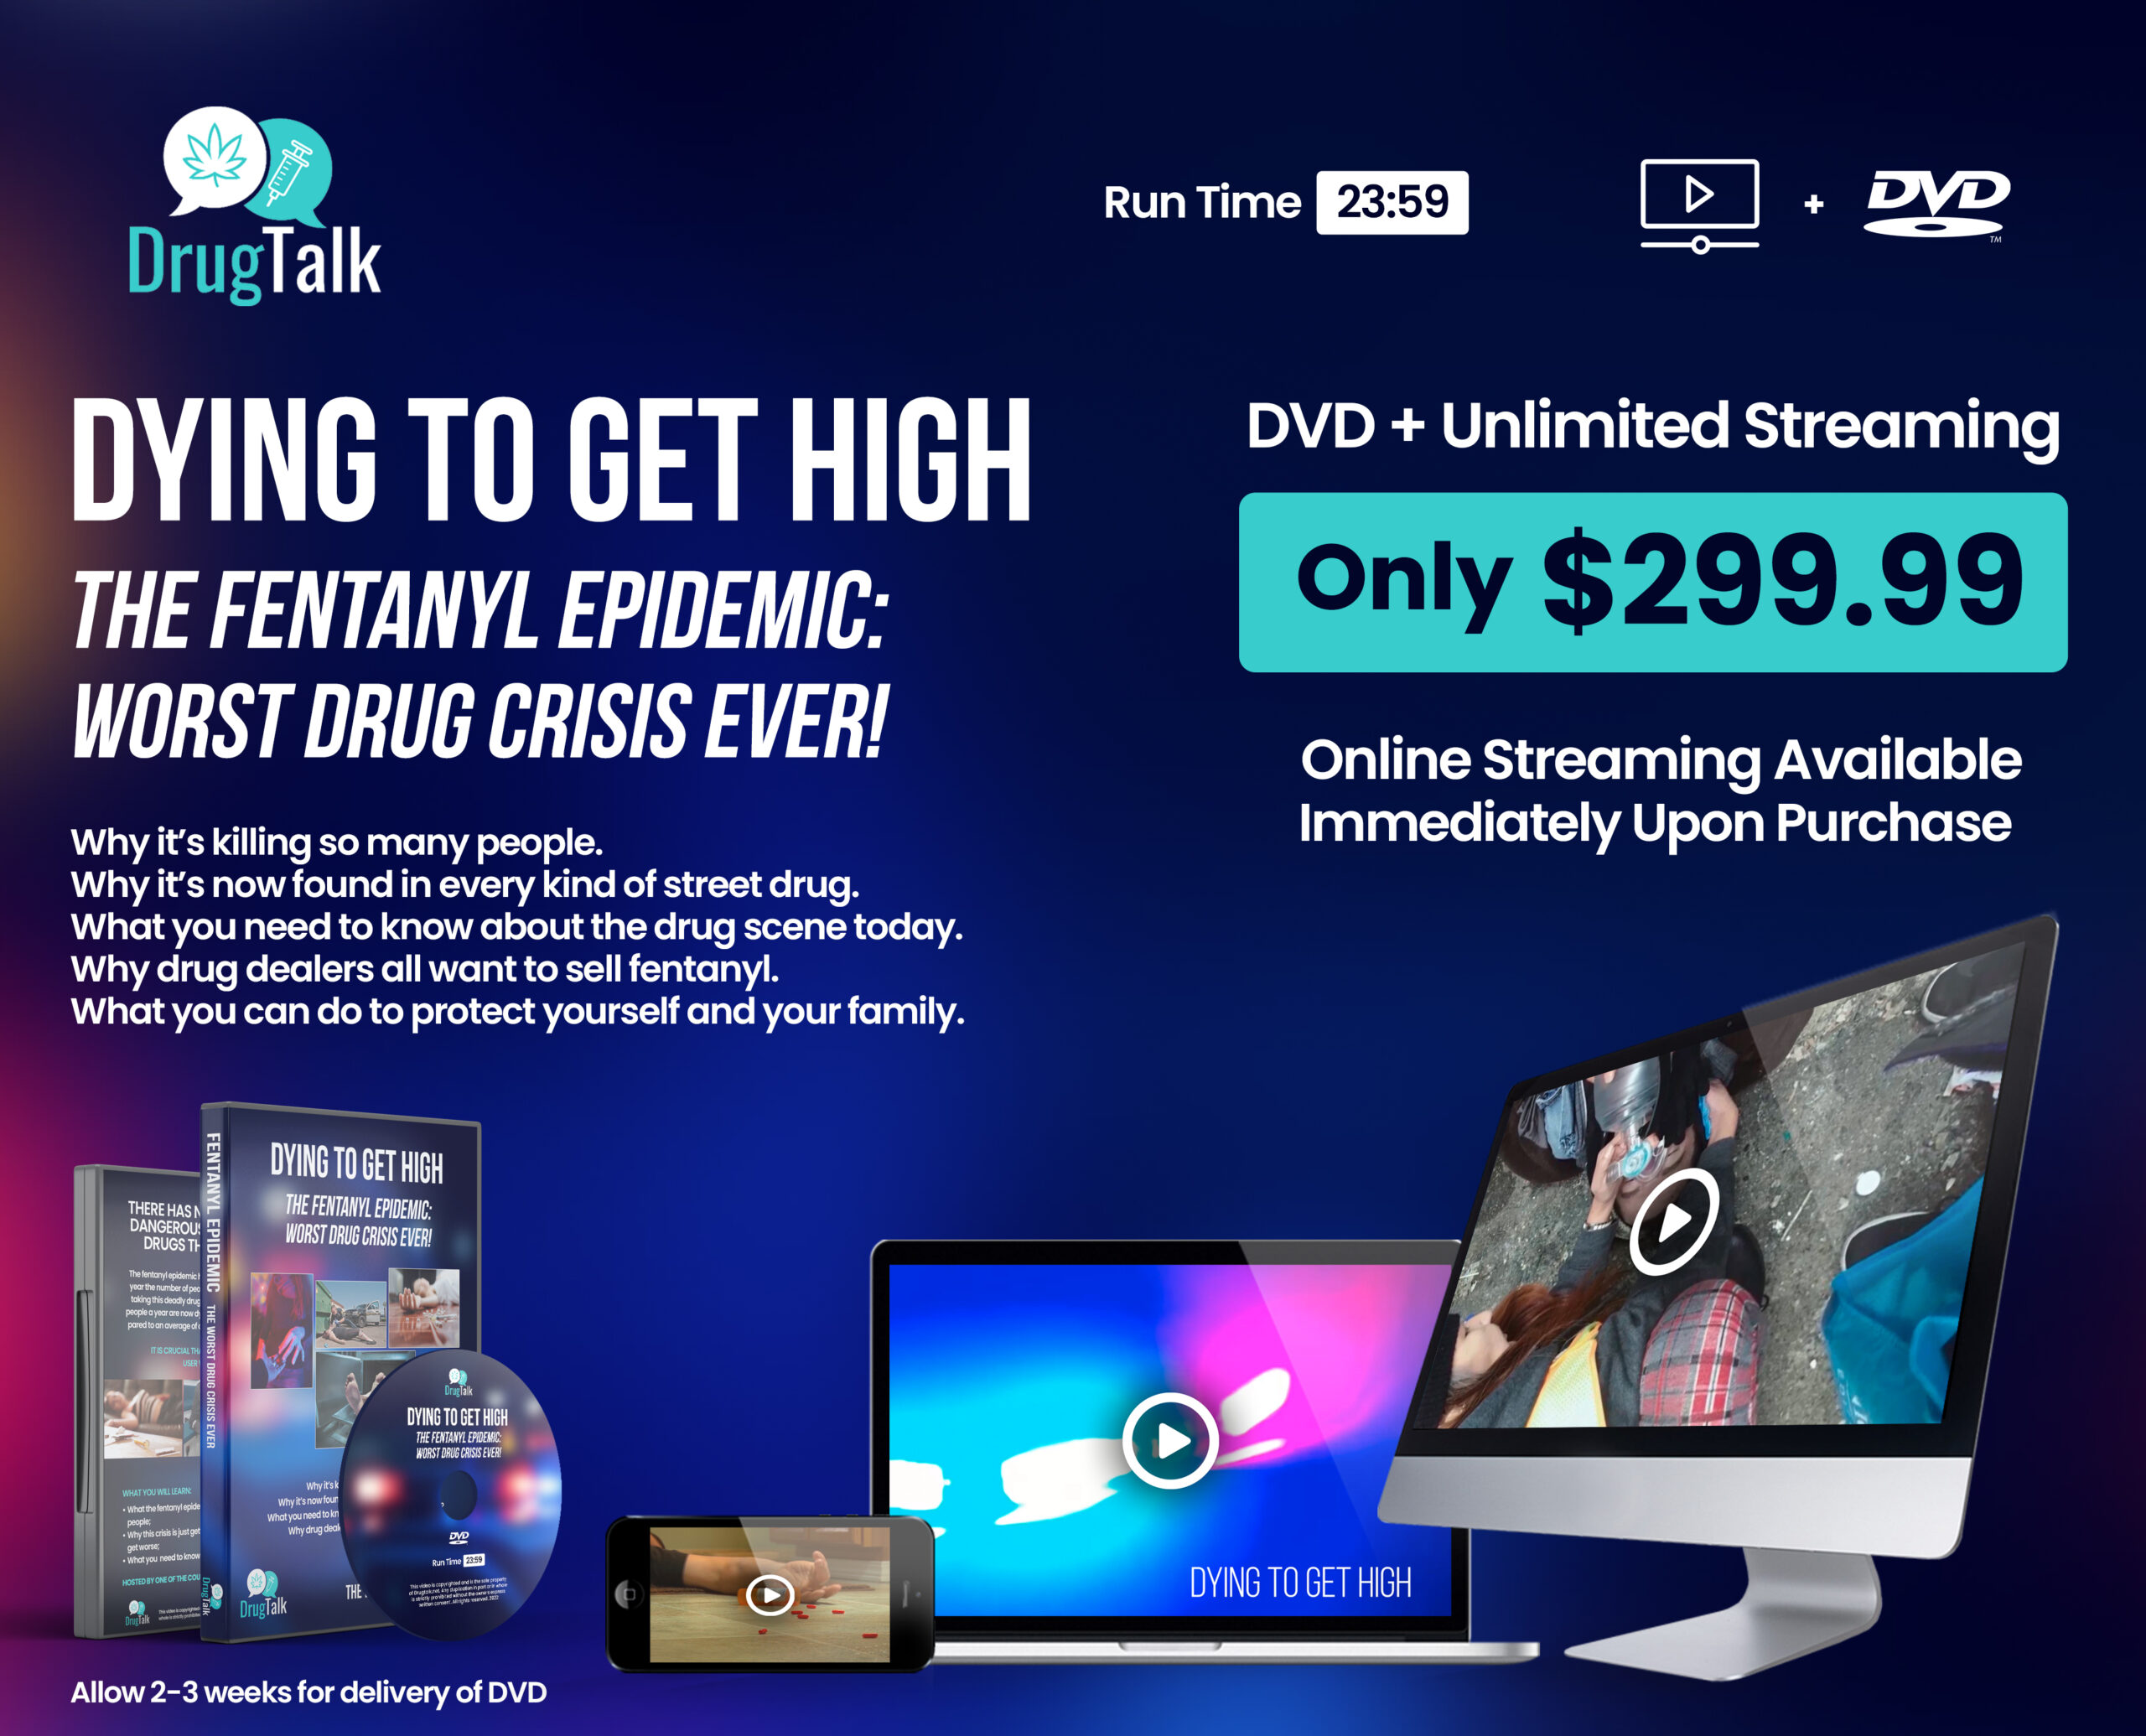 Dying to Get High (DVD + Unlimited Online Streaming)